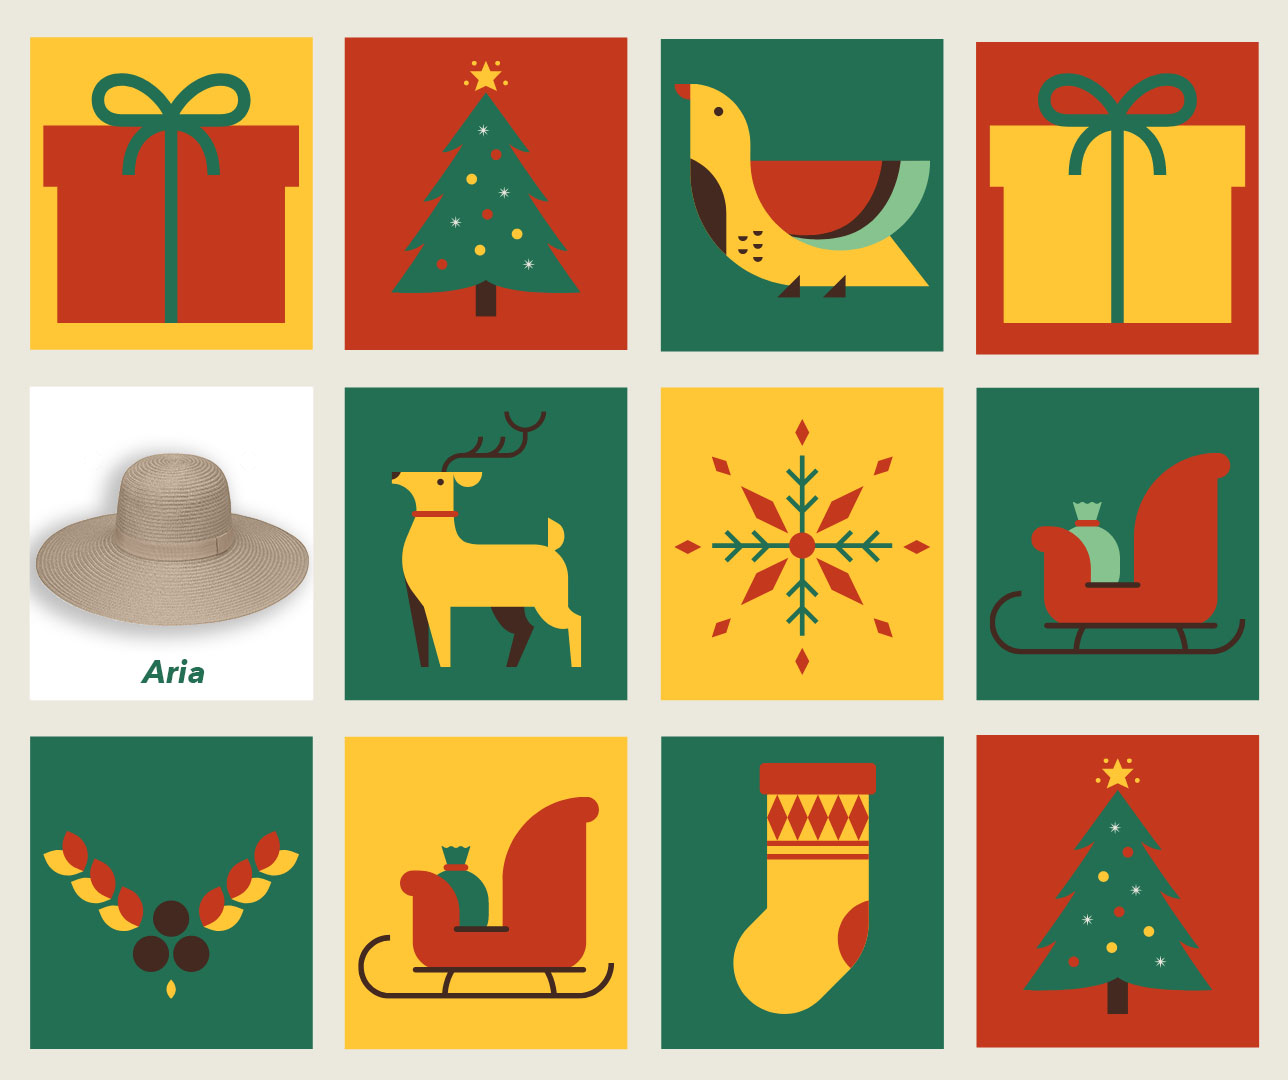 12 Days of Hats - 15% off Aria